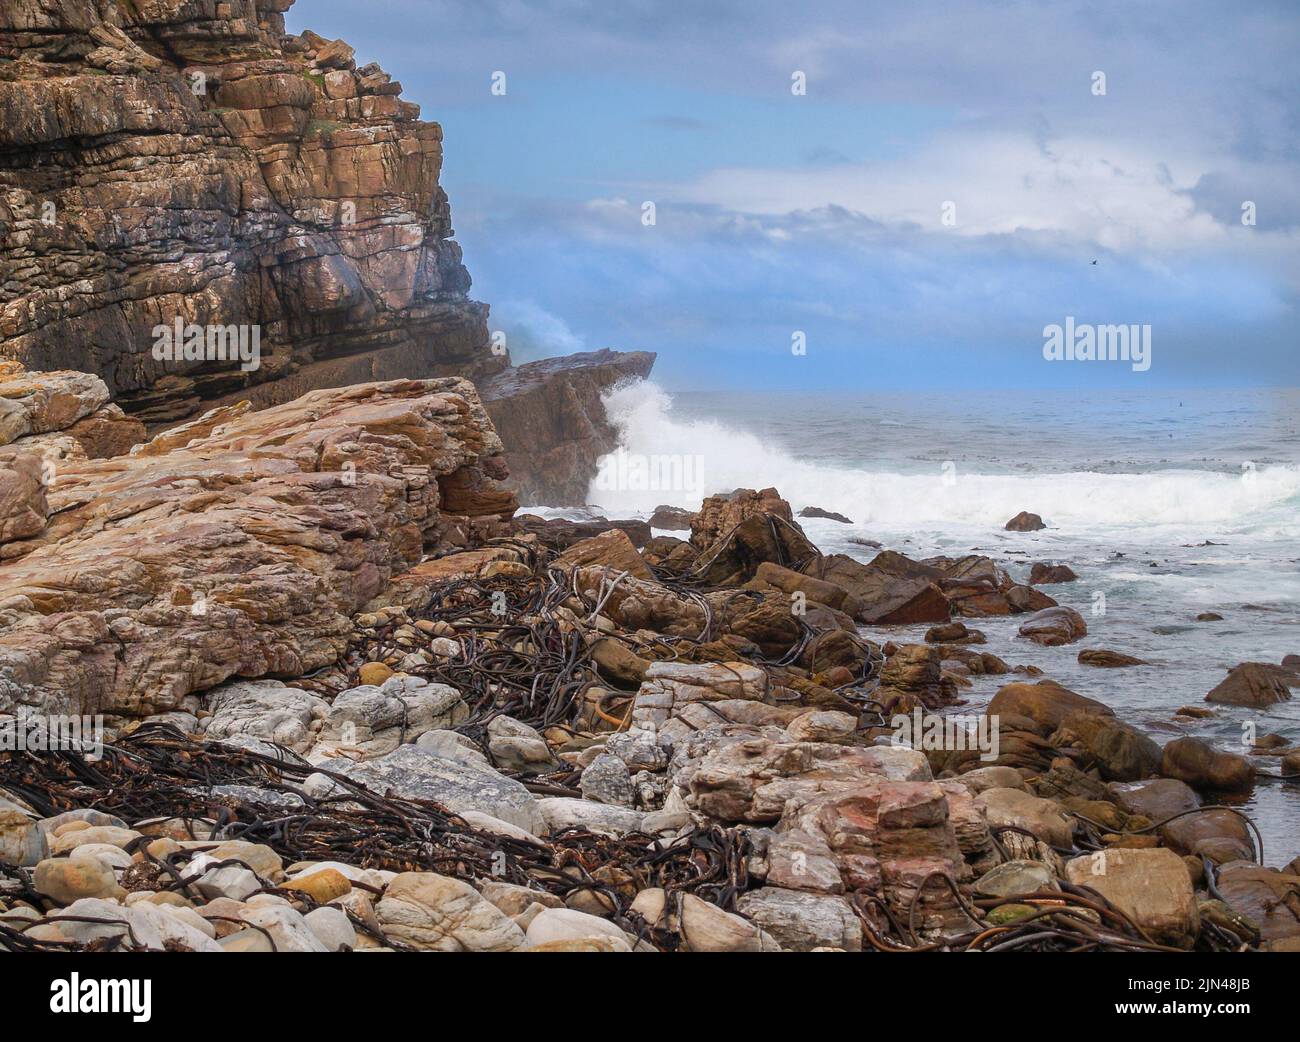 Rocky foreshore and rough seas at Cape Of Good Hope, South Africa. Stock Photo